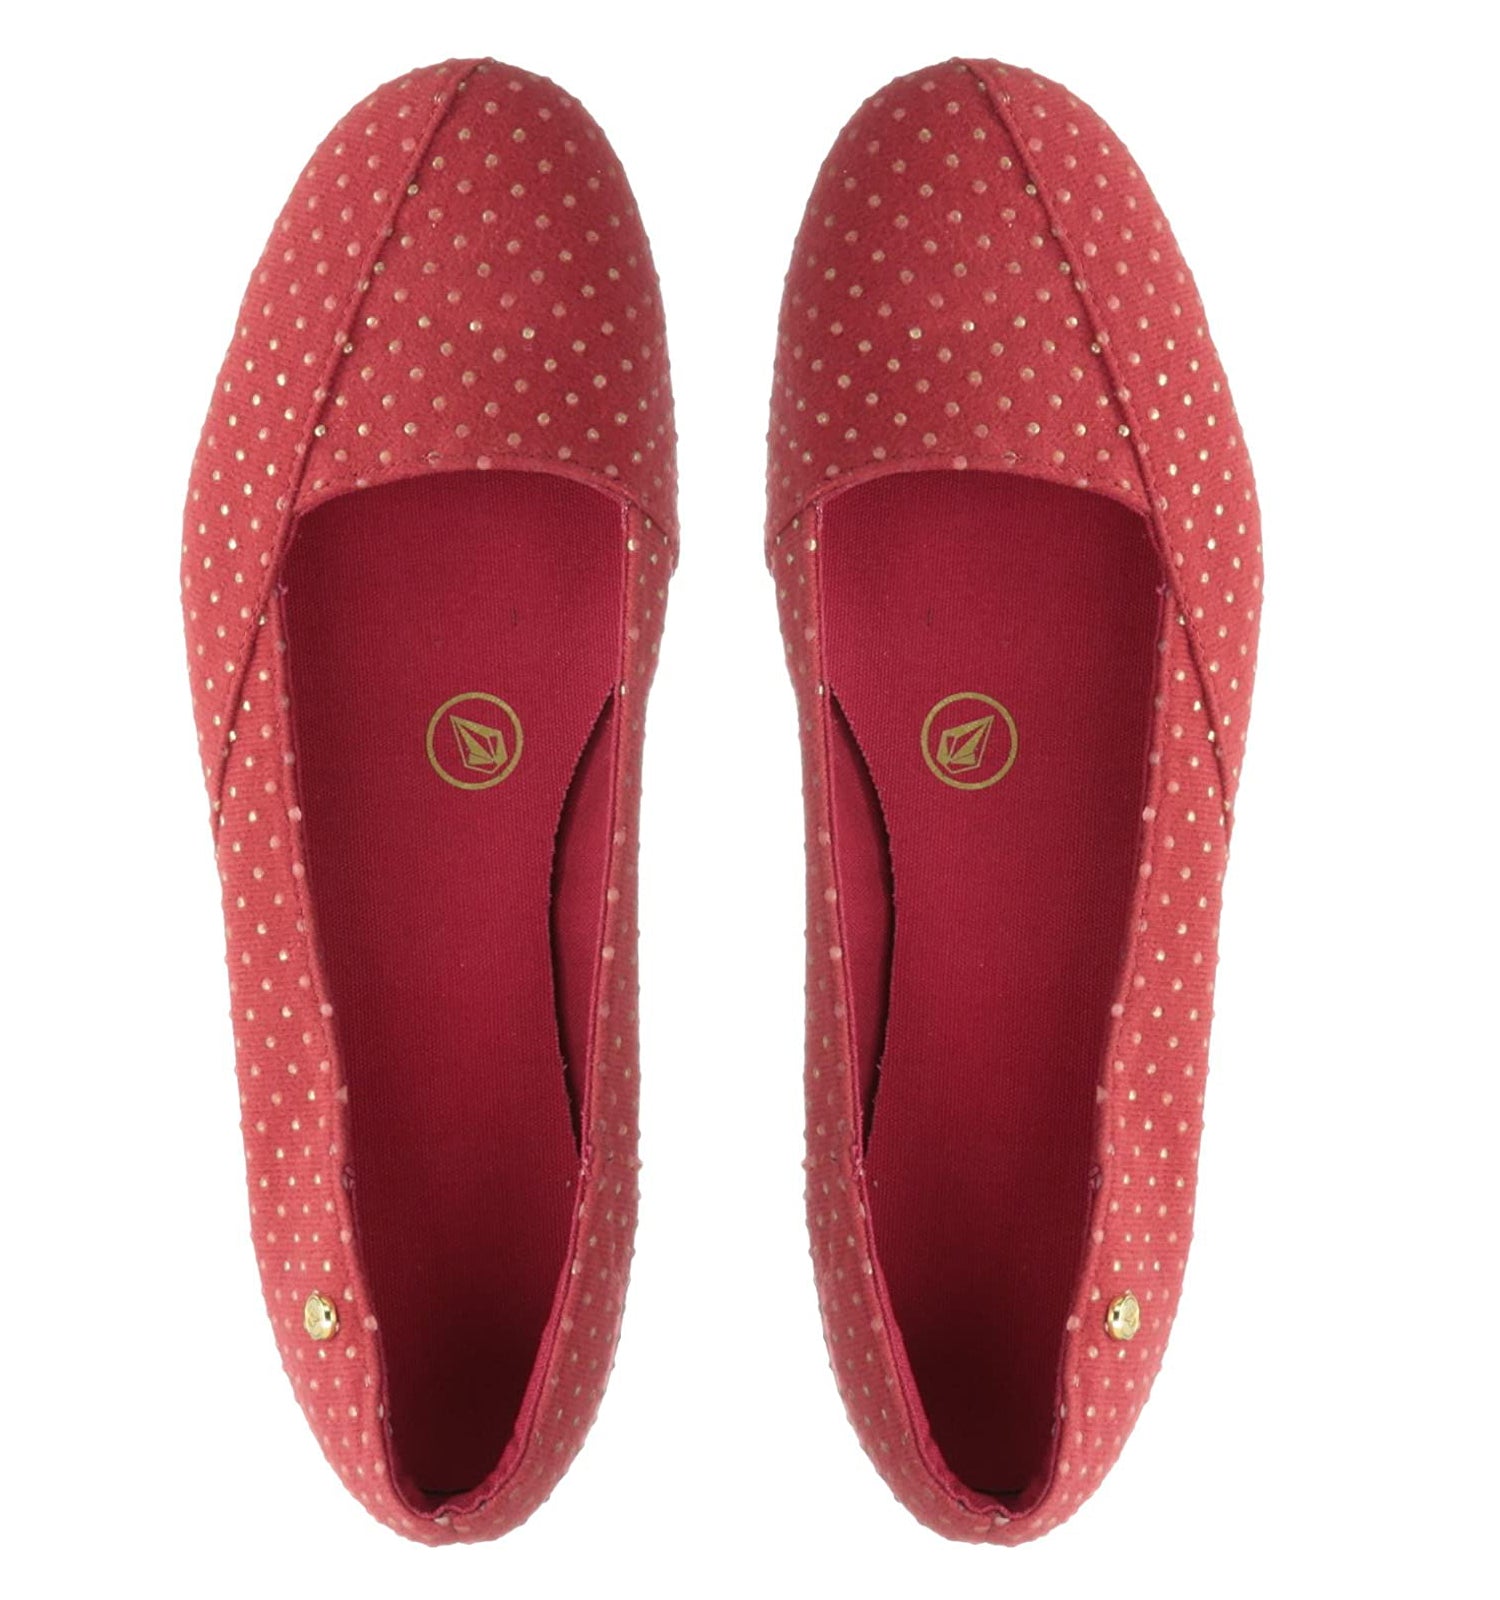 Volcom Game On Womens Shoe Red Studs 7